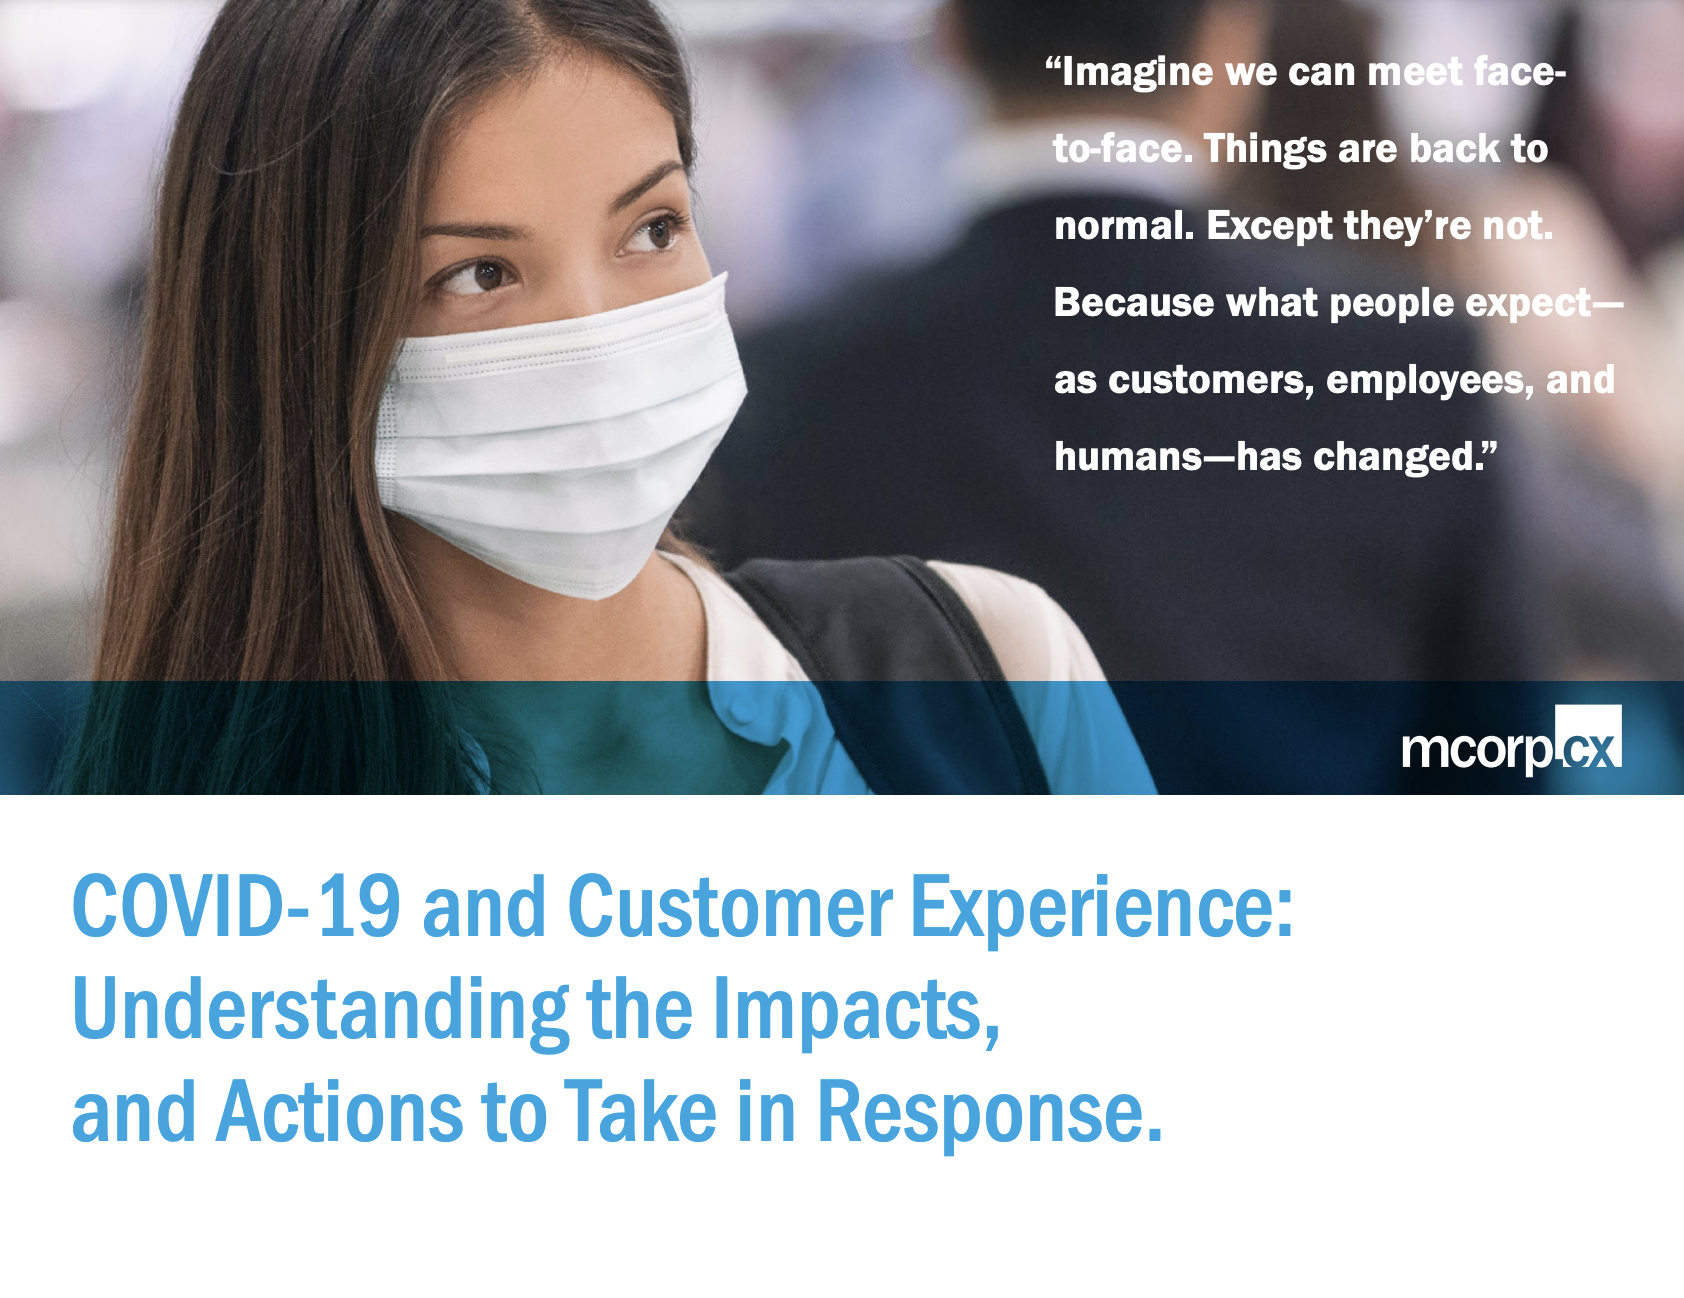 COVID-19 and the Customer Experience